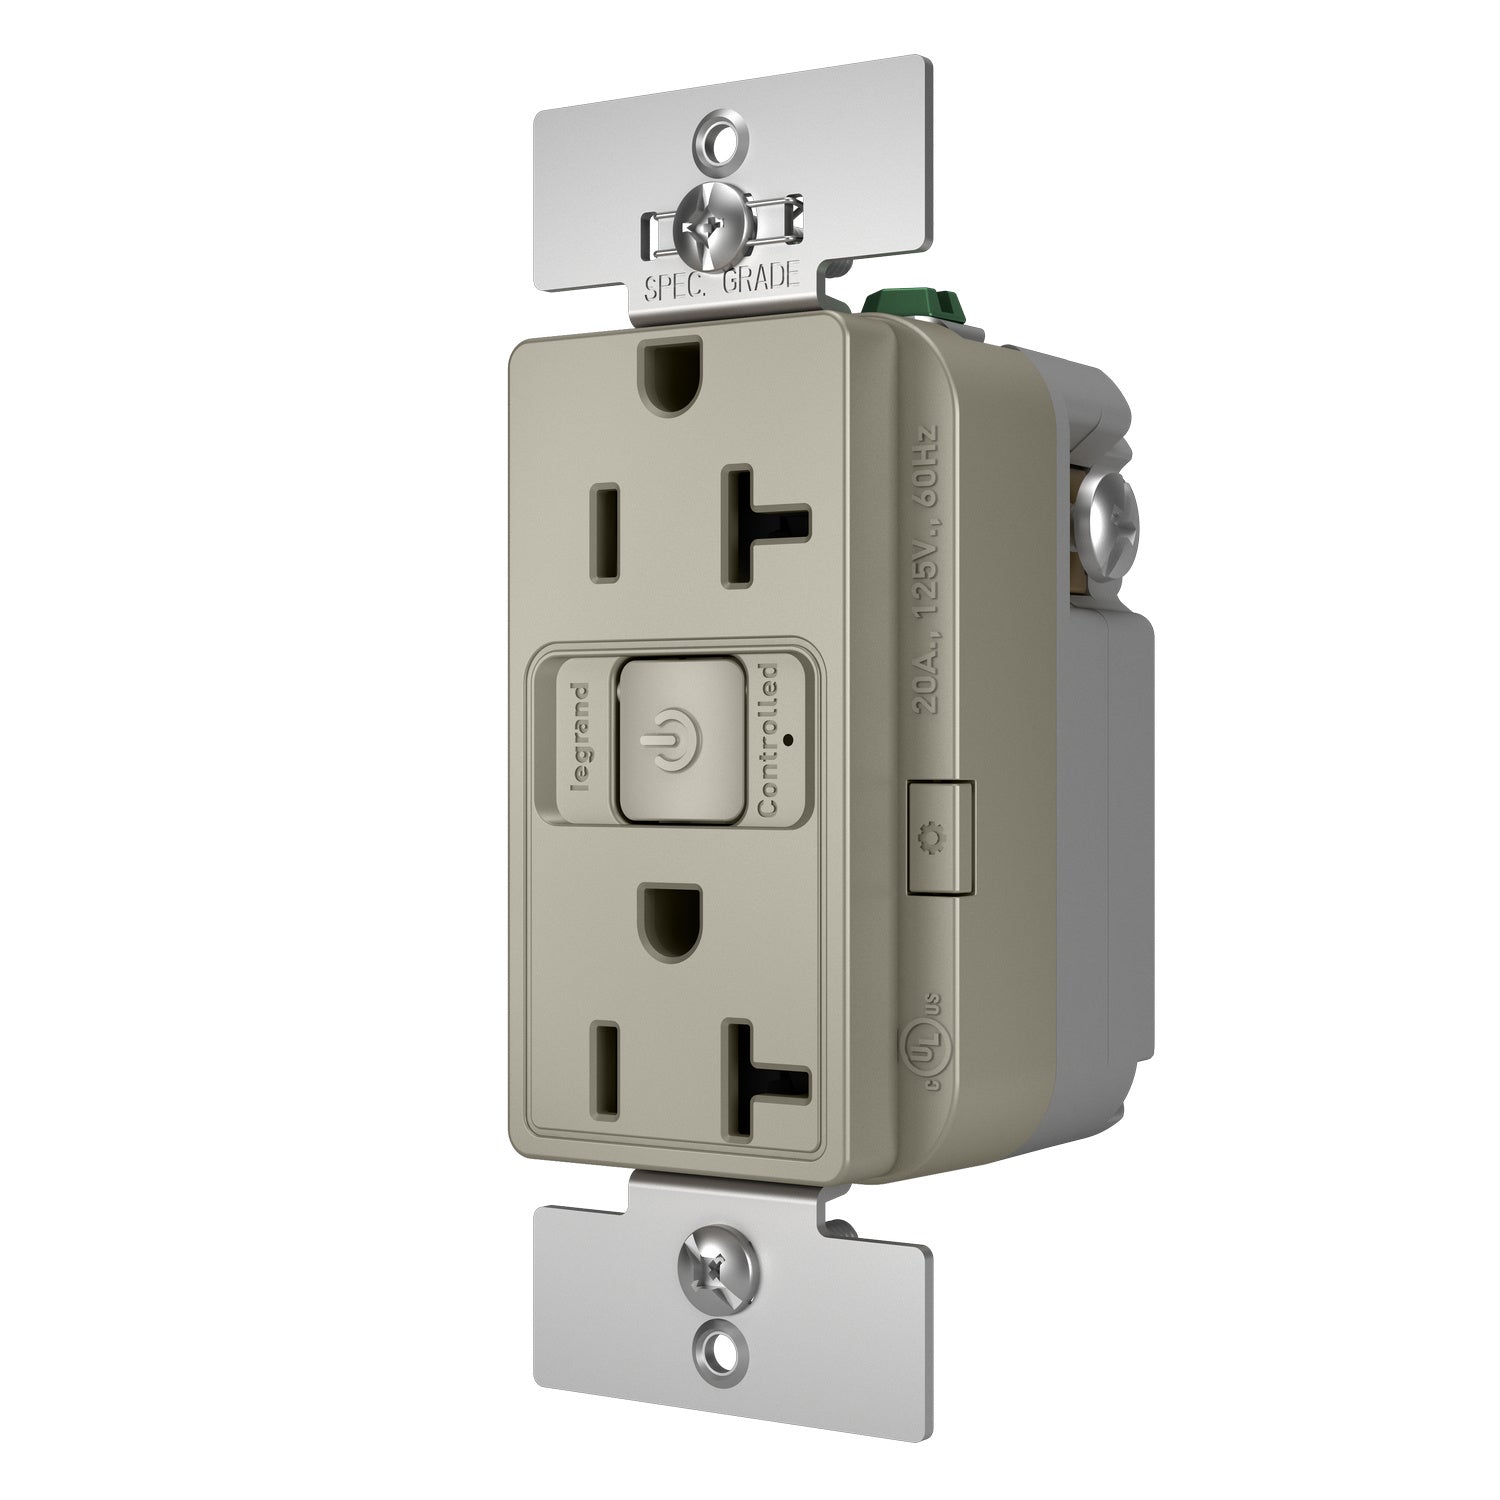 Legrand Canada - WNRR20NI - 20A Outlet - Nickel